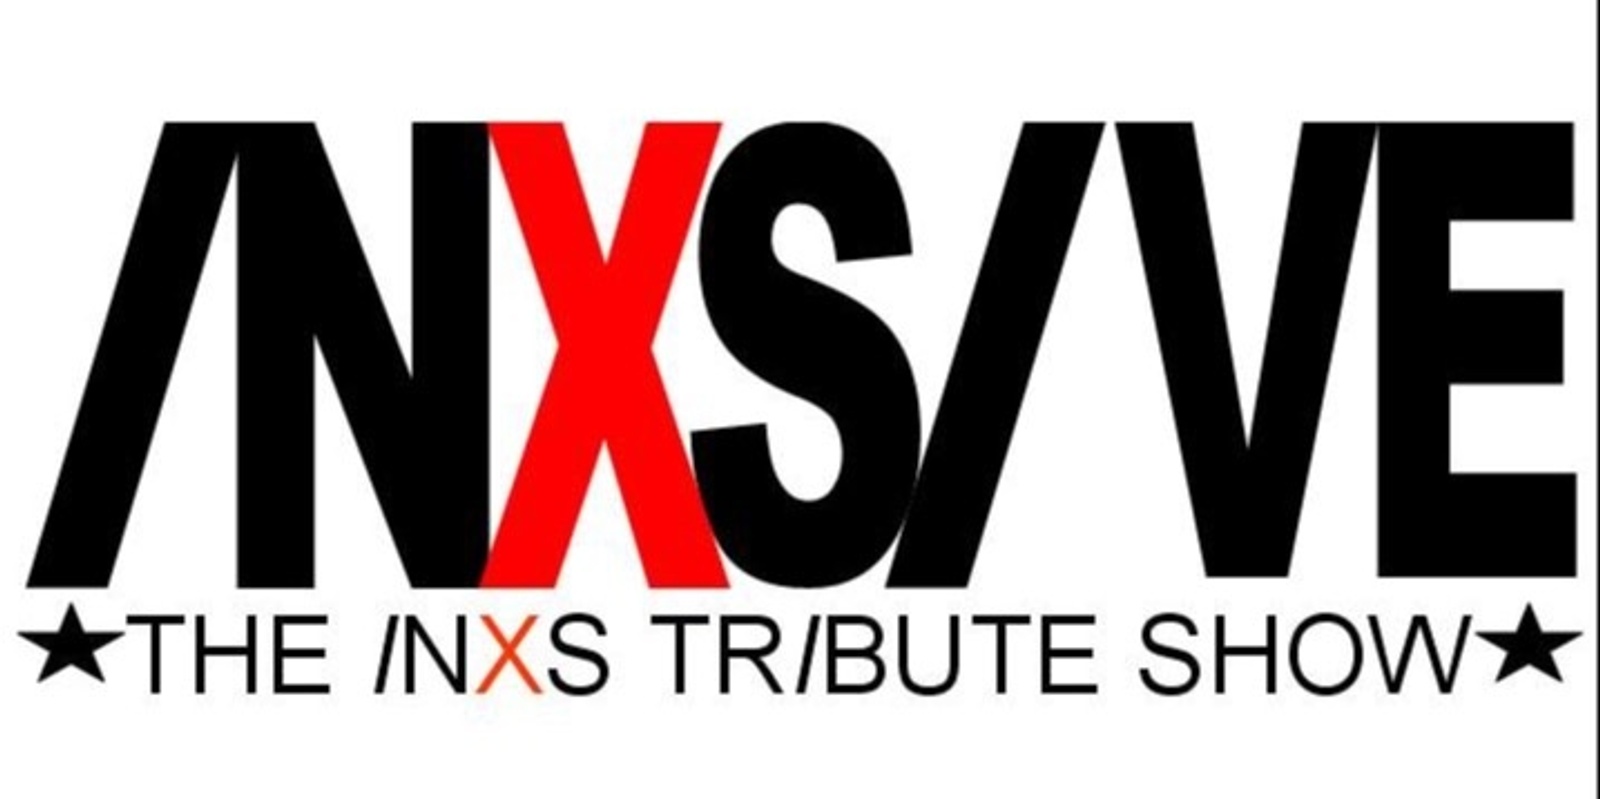 Banner image for INXSIVE - The INXS Tribute Show